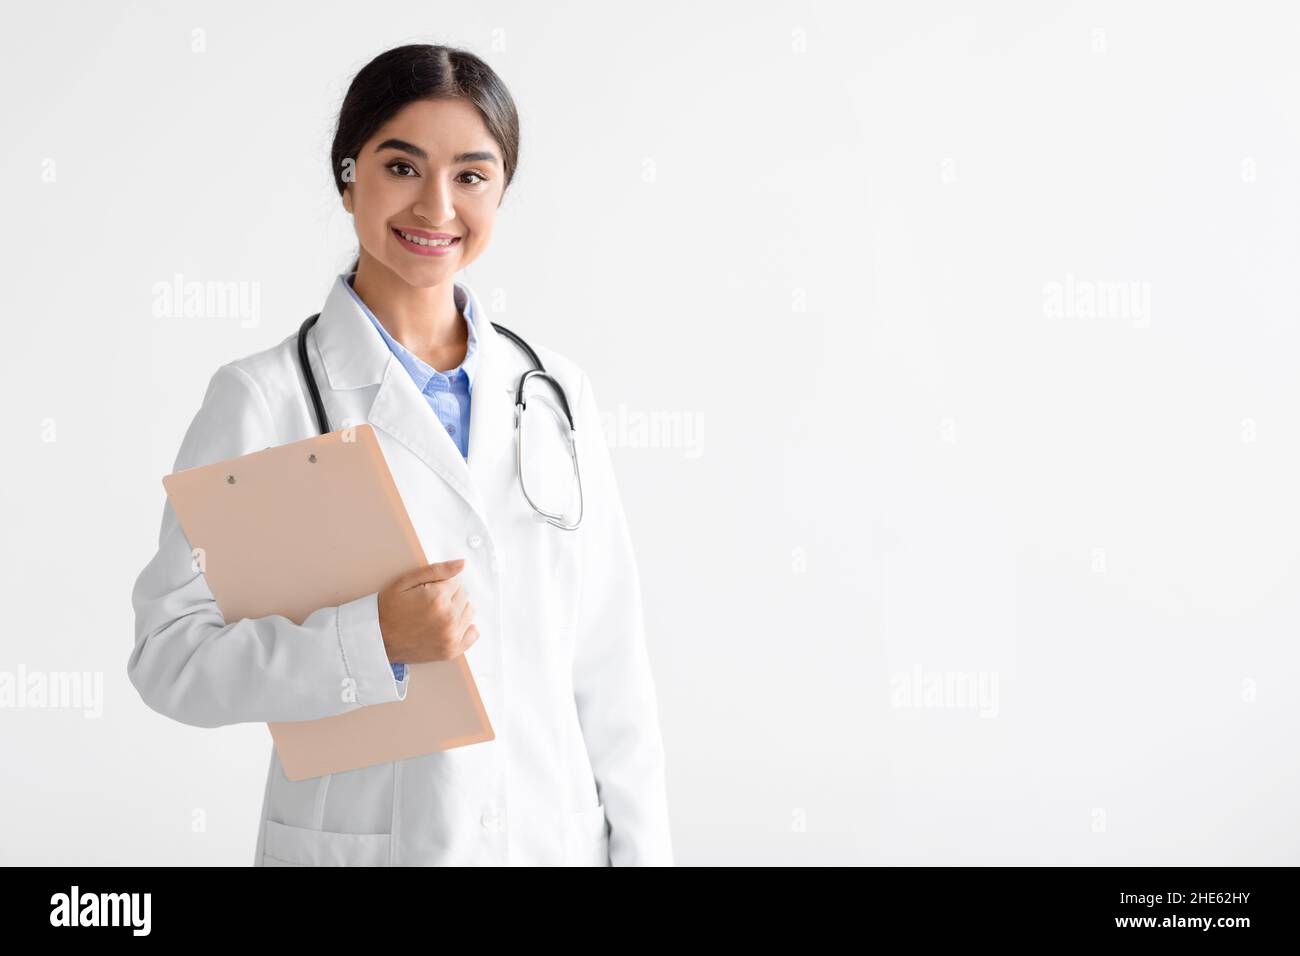 Friendly young cute indian female doctor in uniform with tablet in hands looking at camera isolated on white background Stock Photo